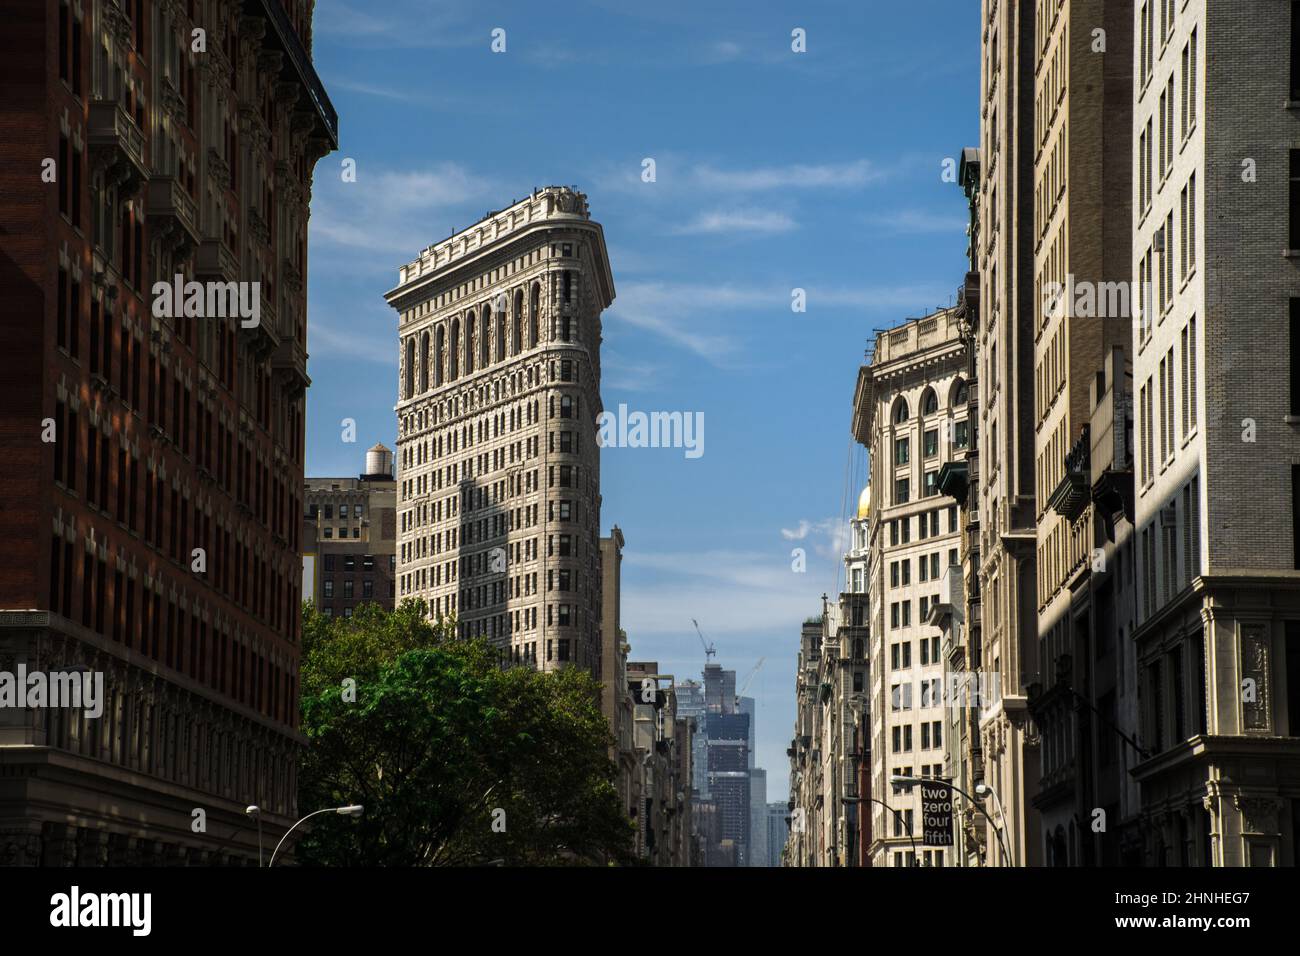 New York, USA - august 8th 2016  famous Flatiron Building on the background, New York City, USA Stock Photo